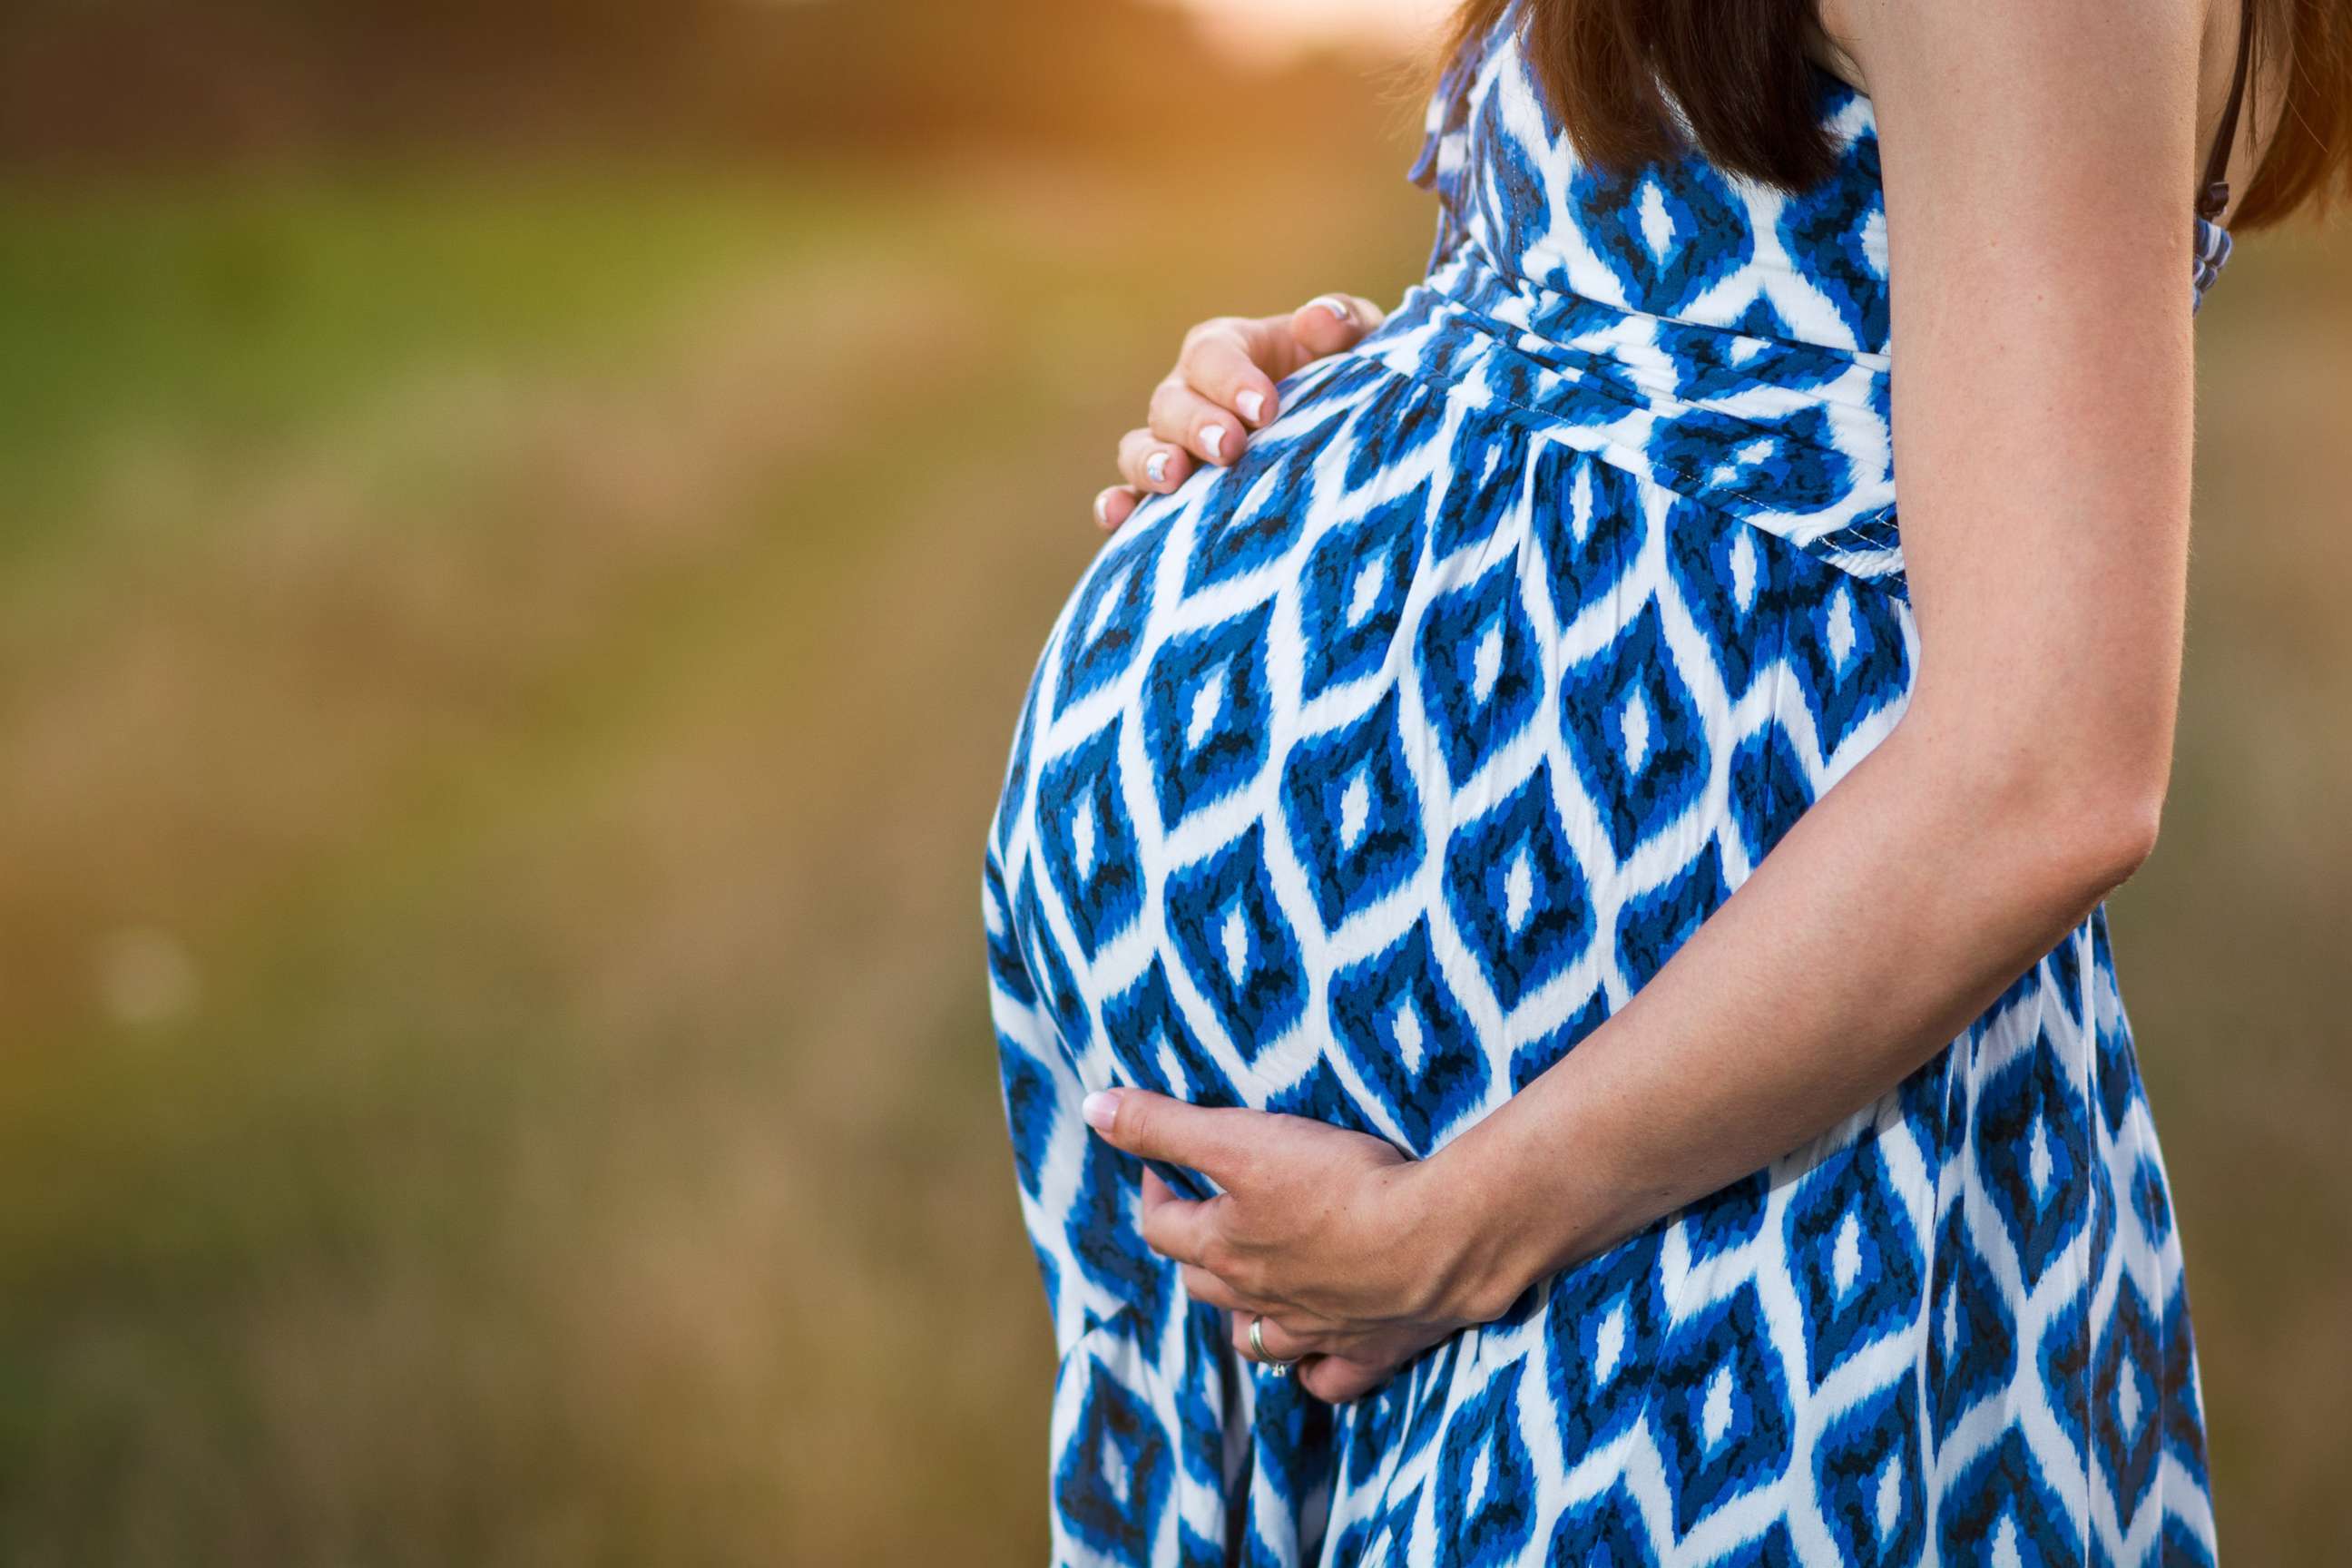 PHOTO: A pregnant woman poses in blue dress cradling her belly in this stock image. 